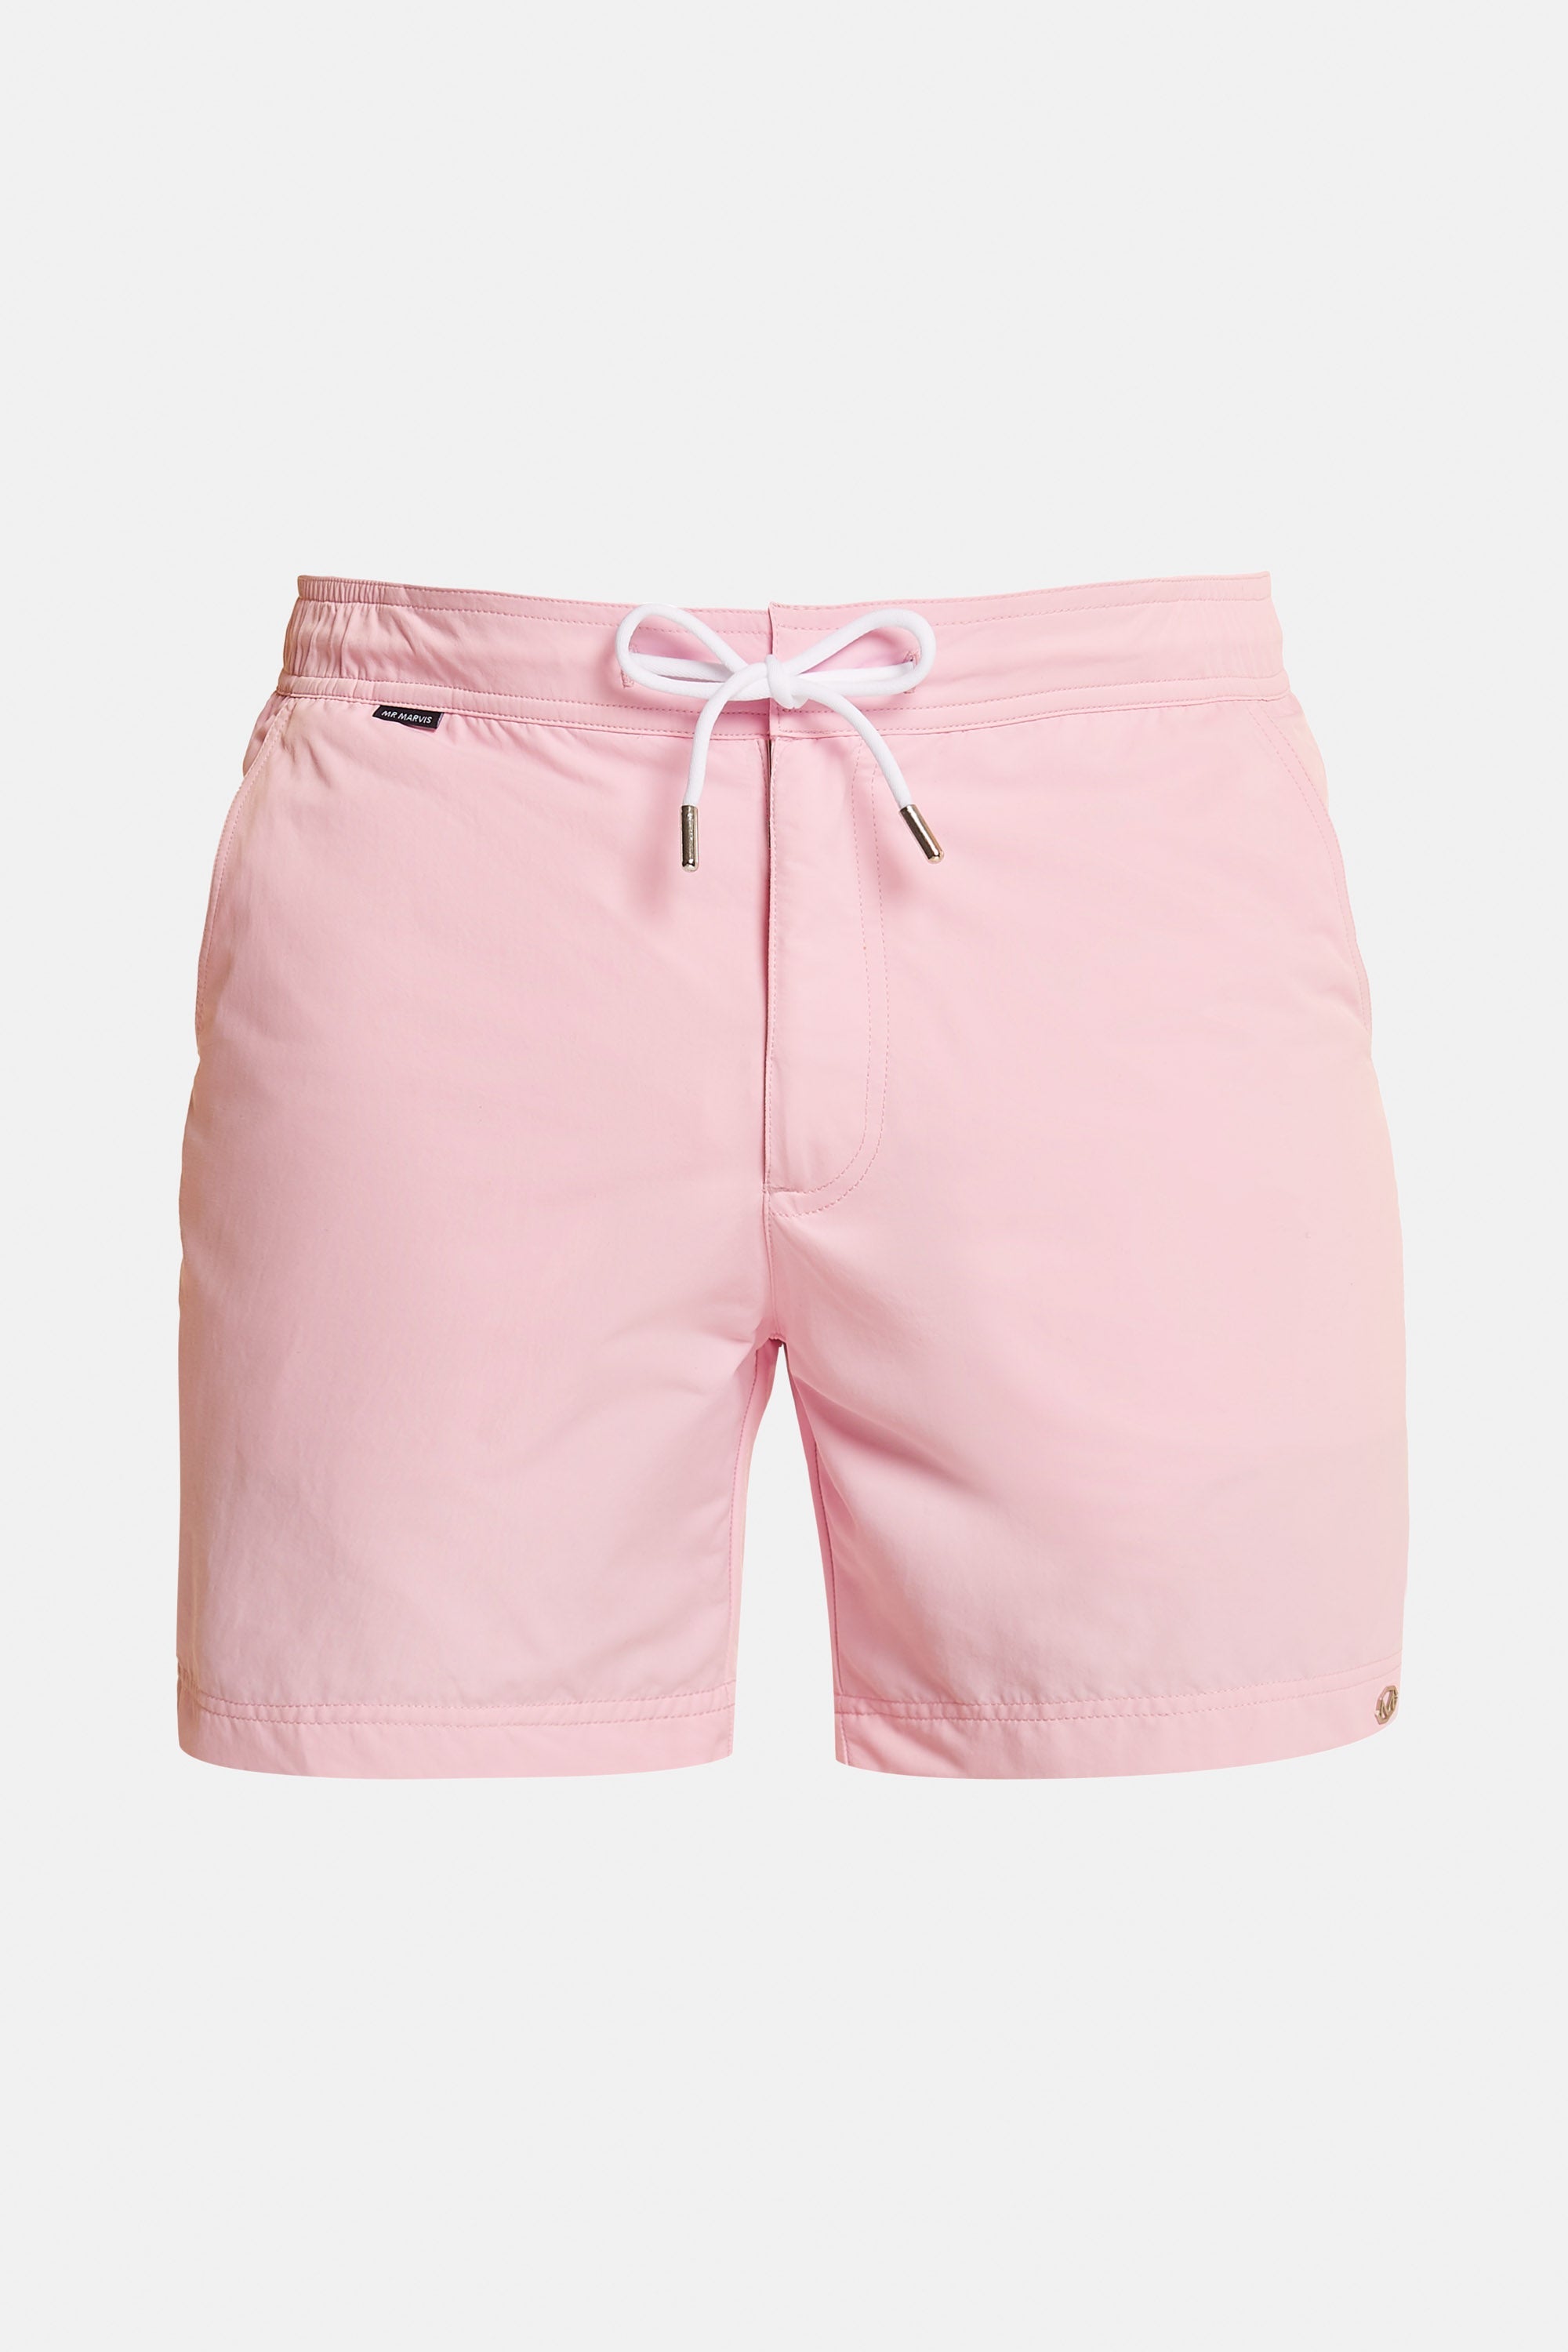 farm Above head and shoulder Fortress Flamingos | Men's Pink Swim Shorts | MR MARVIS